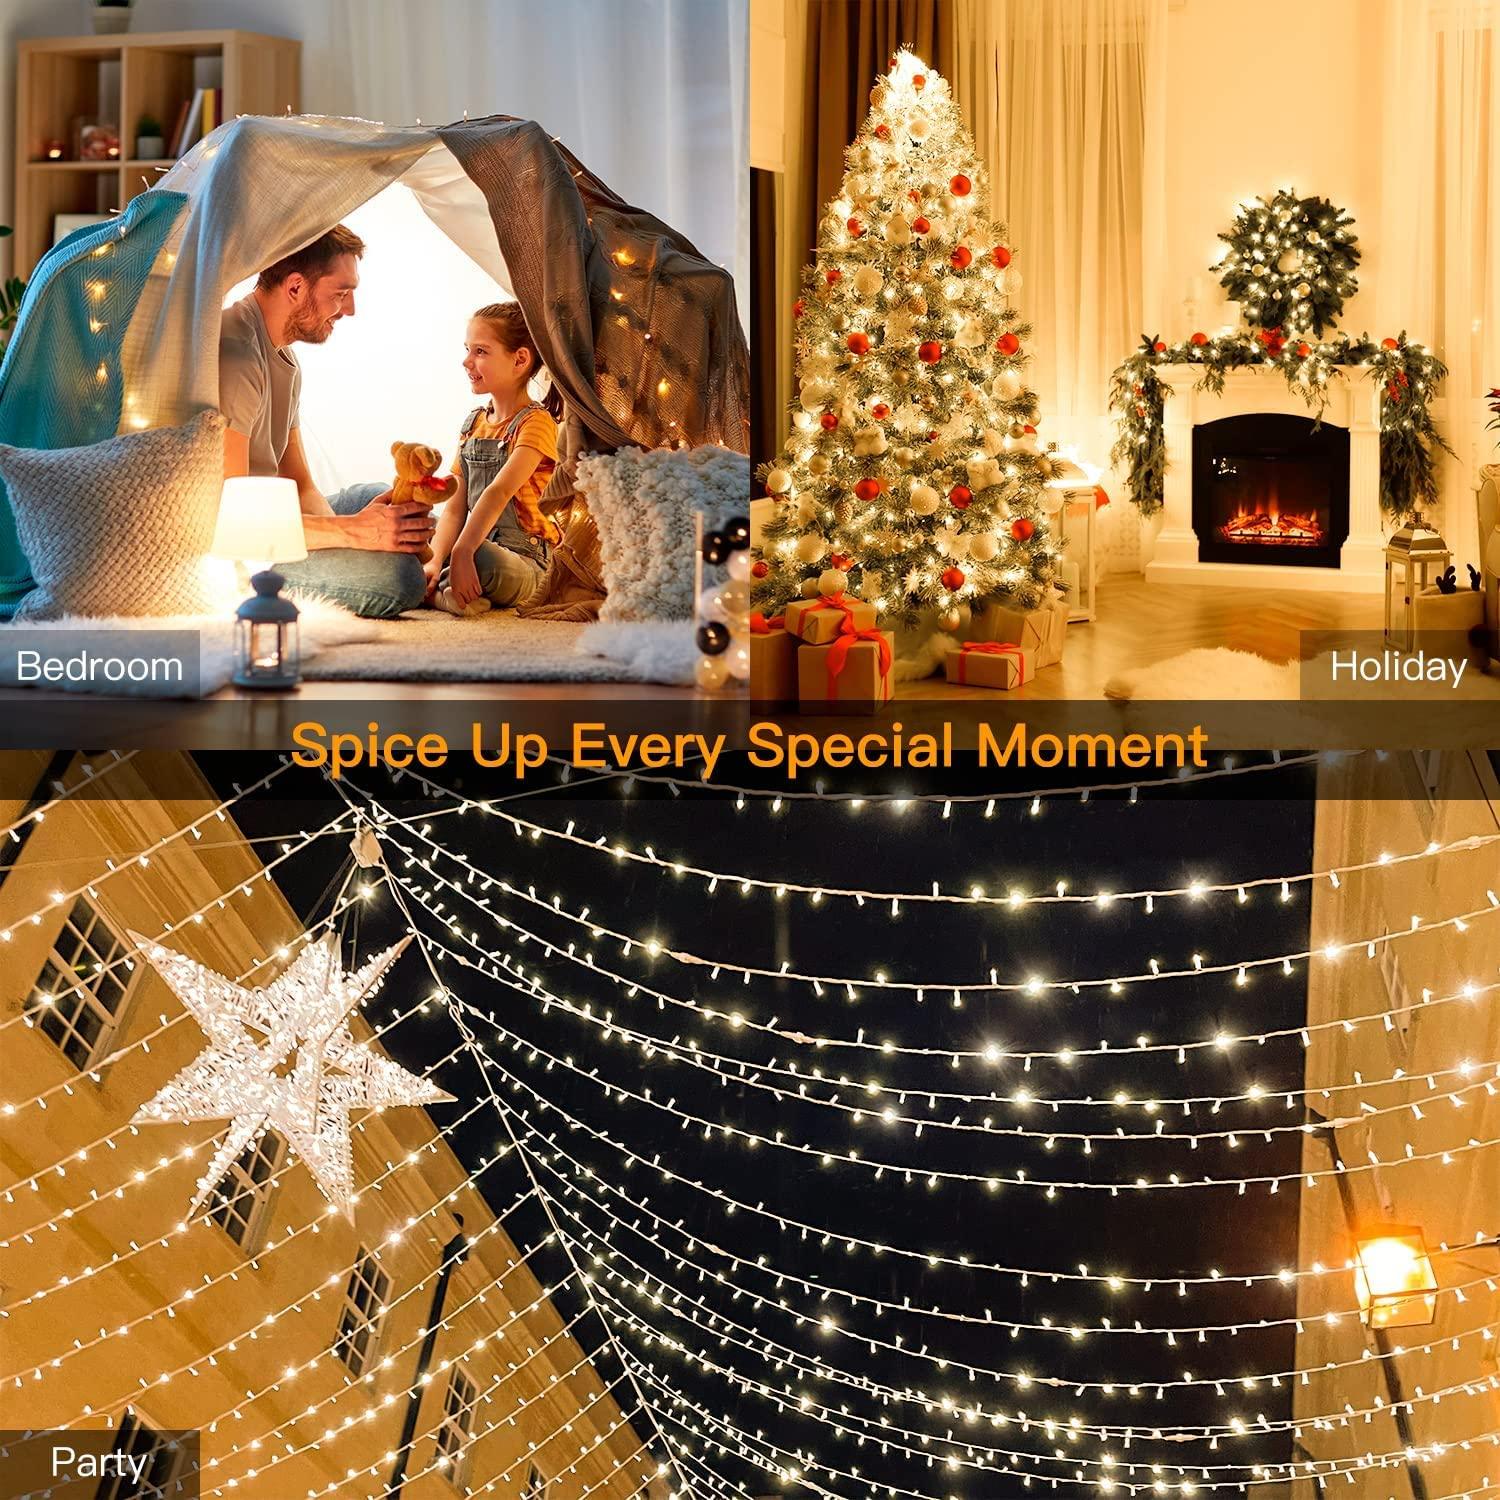 Outdoor String Lights 800LED/330FT with Remote for Wedding and Christmas - Decotree.co Online Shop